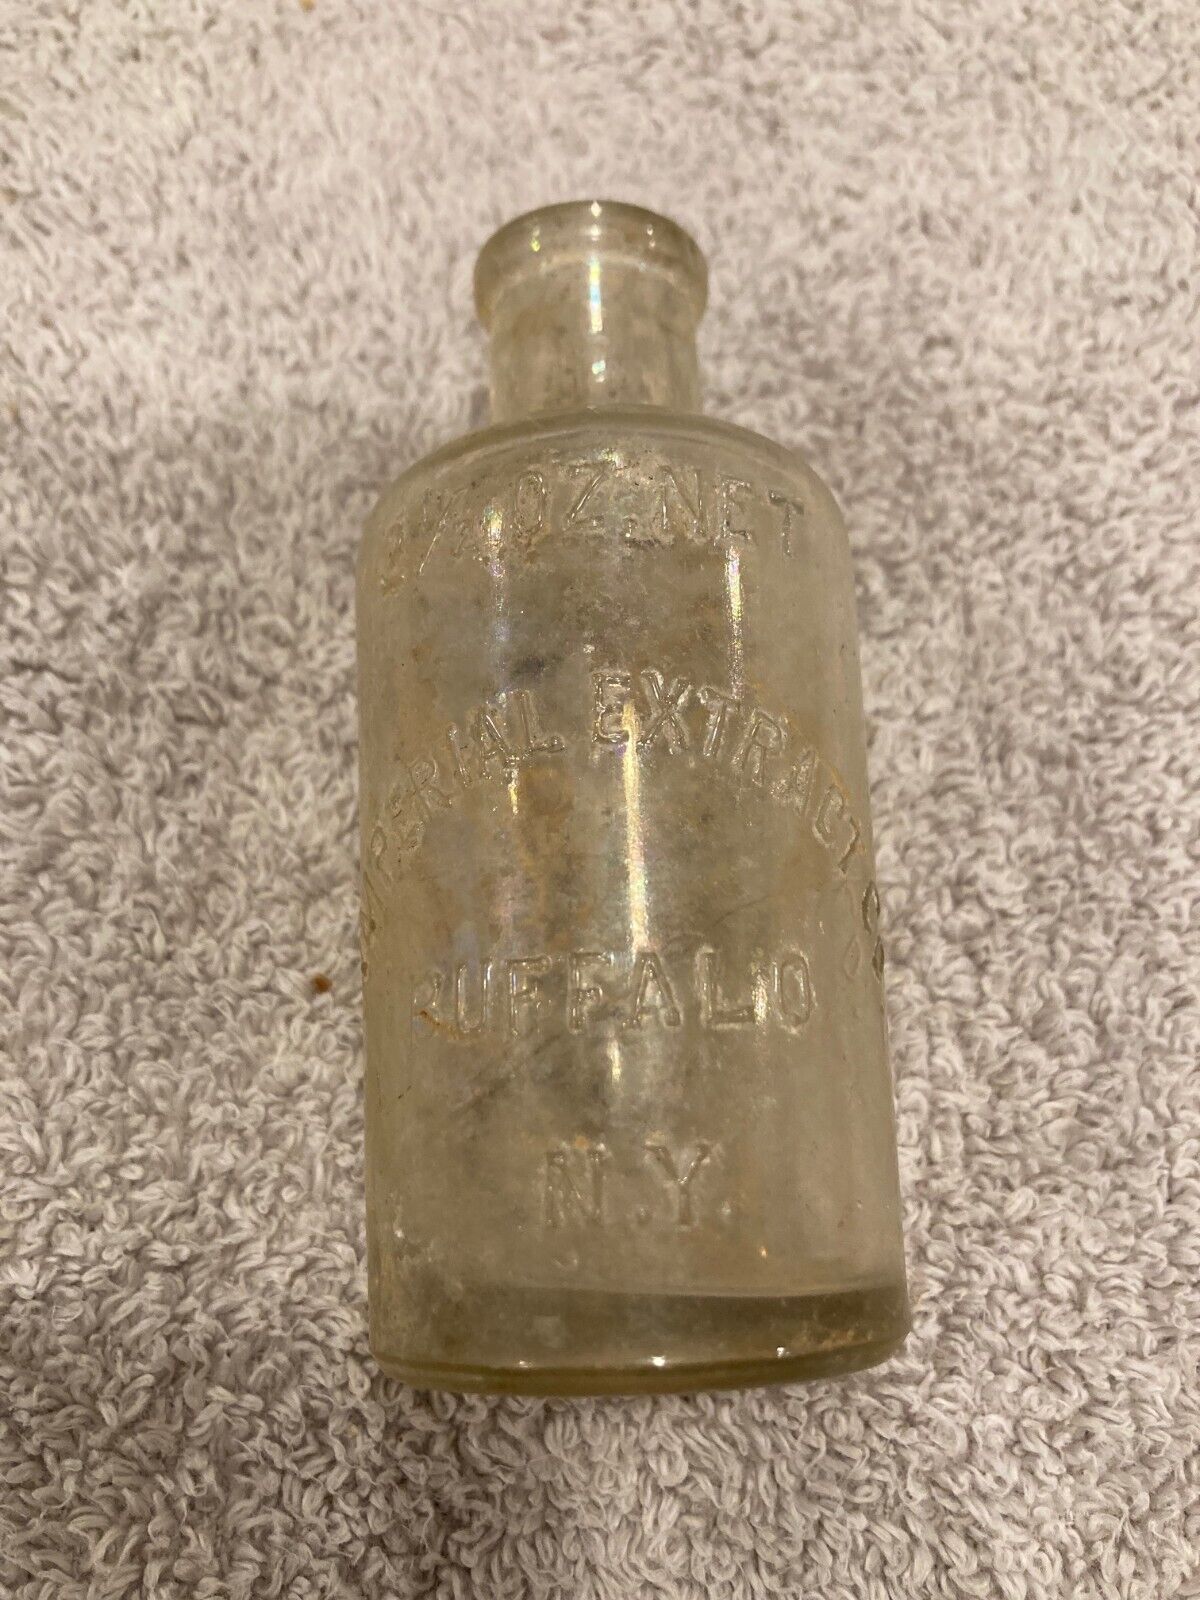 Antique 2-1/2 Ounce Net IMPERIAL EXTRACT BUFFALO, NY Glass Jar- Beach Find